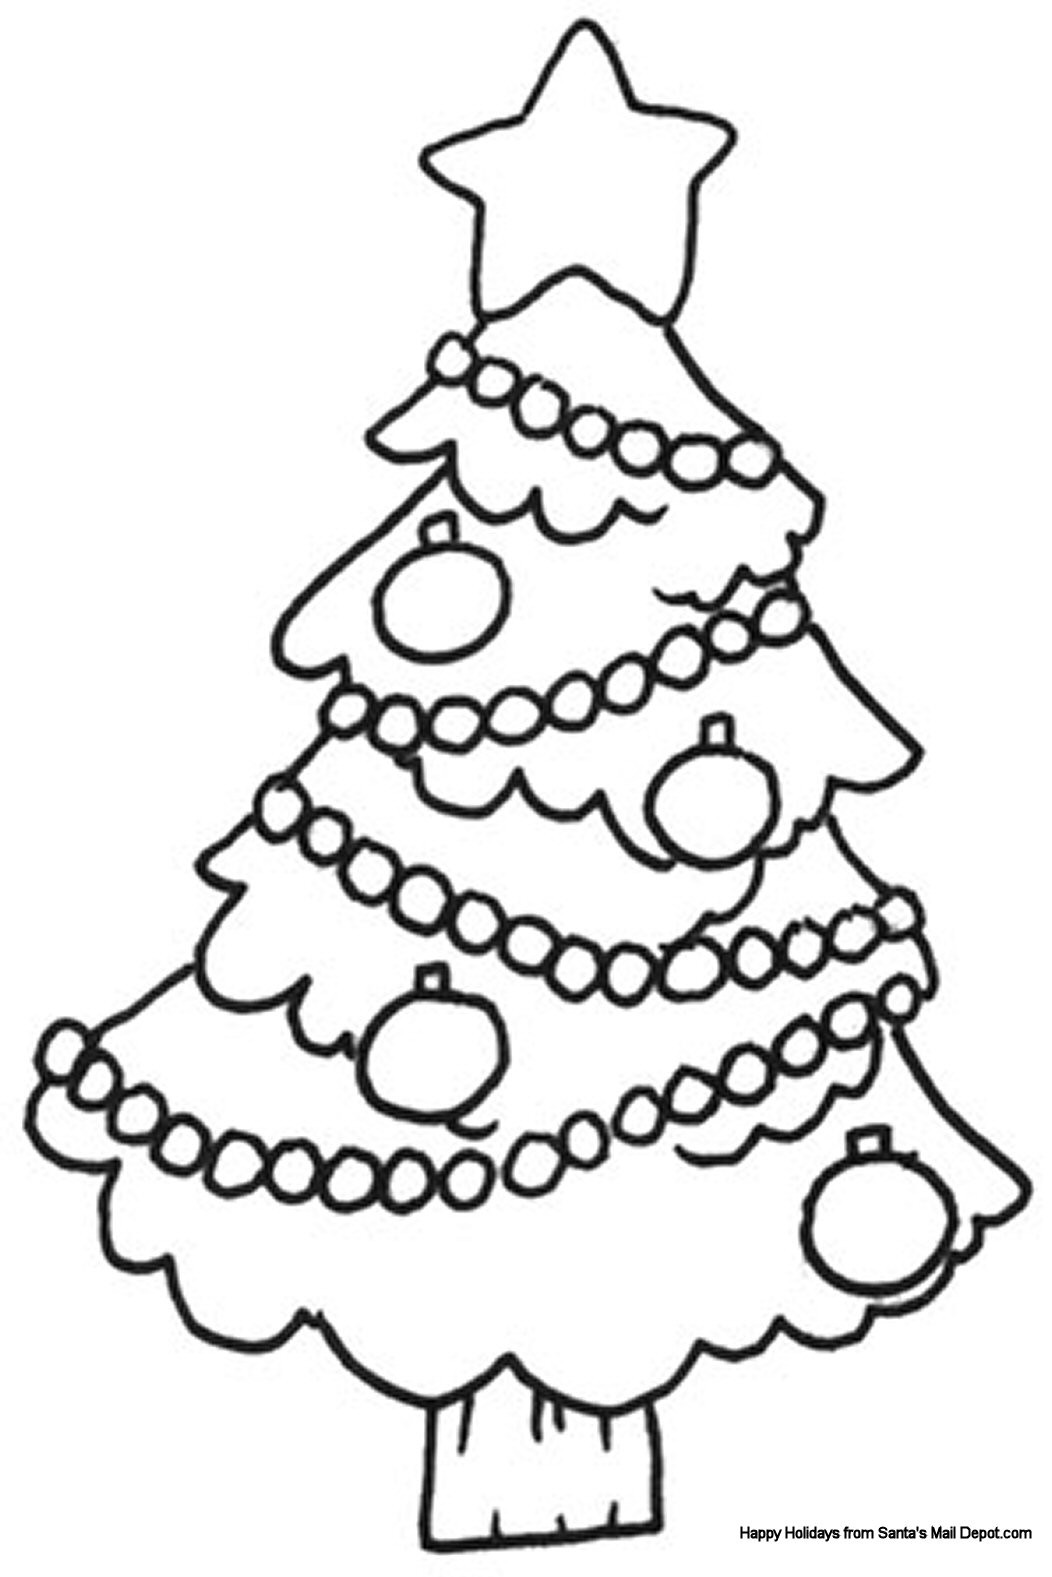 Best ideas about Free Coloring Pages Christmas
. Save or Pin Coloring Pages Now.